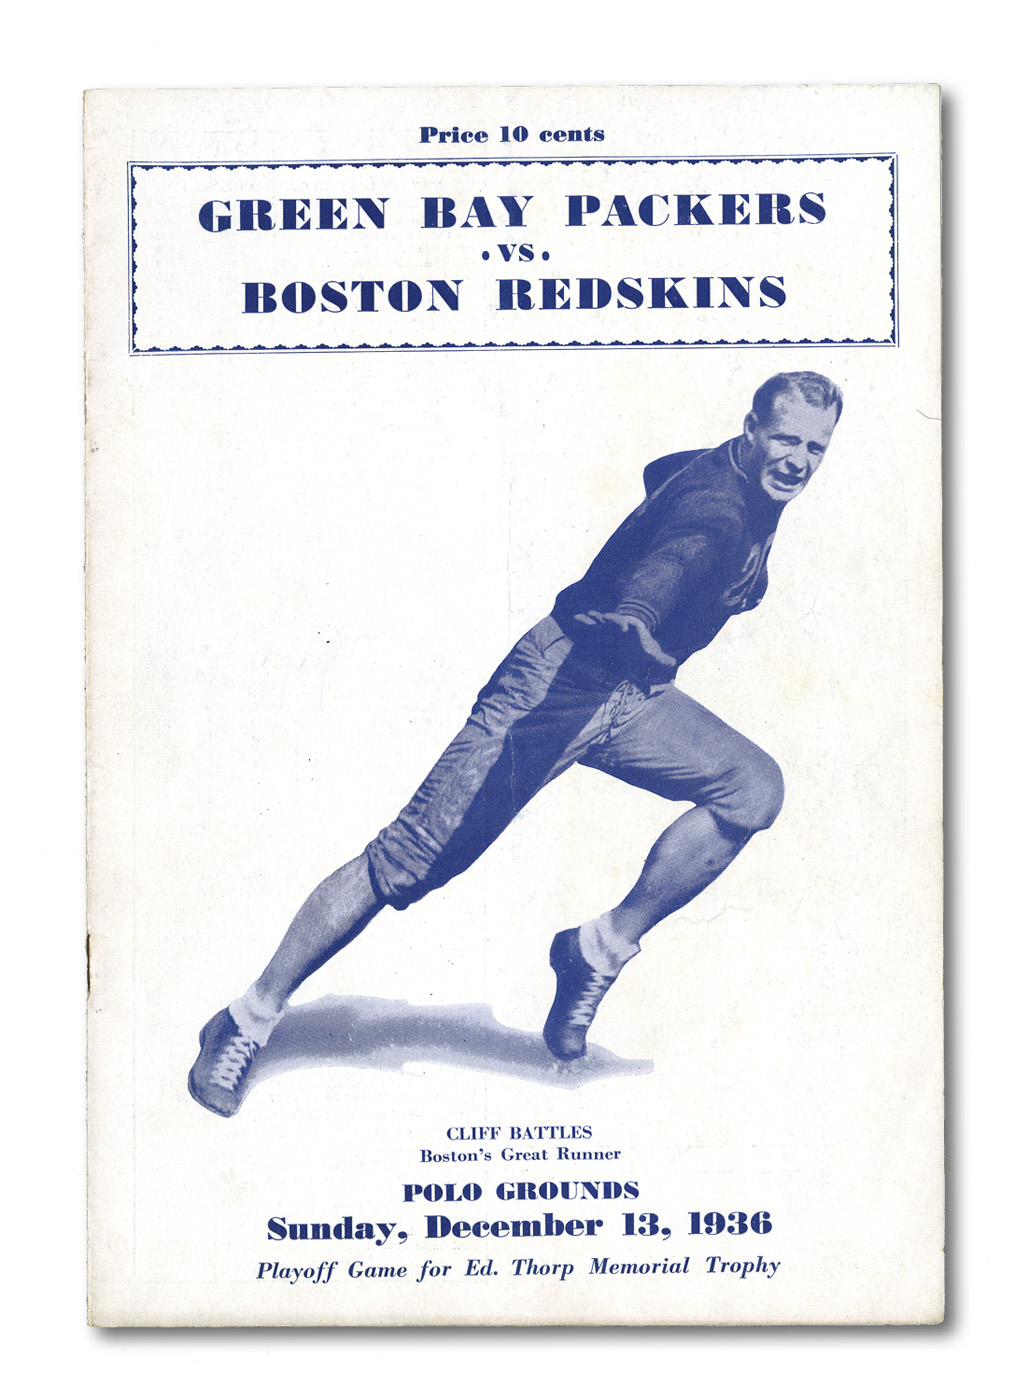 Green Bay Packers game programs, 1939-1965 - Turning Points in Wisconsin  History - Wisconsin Historical Society Online Collections